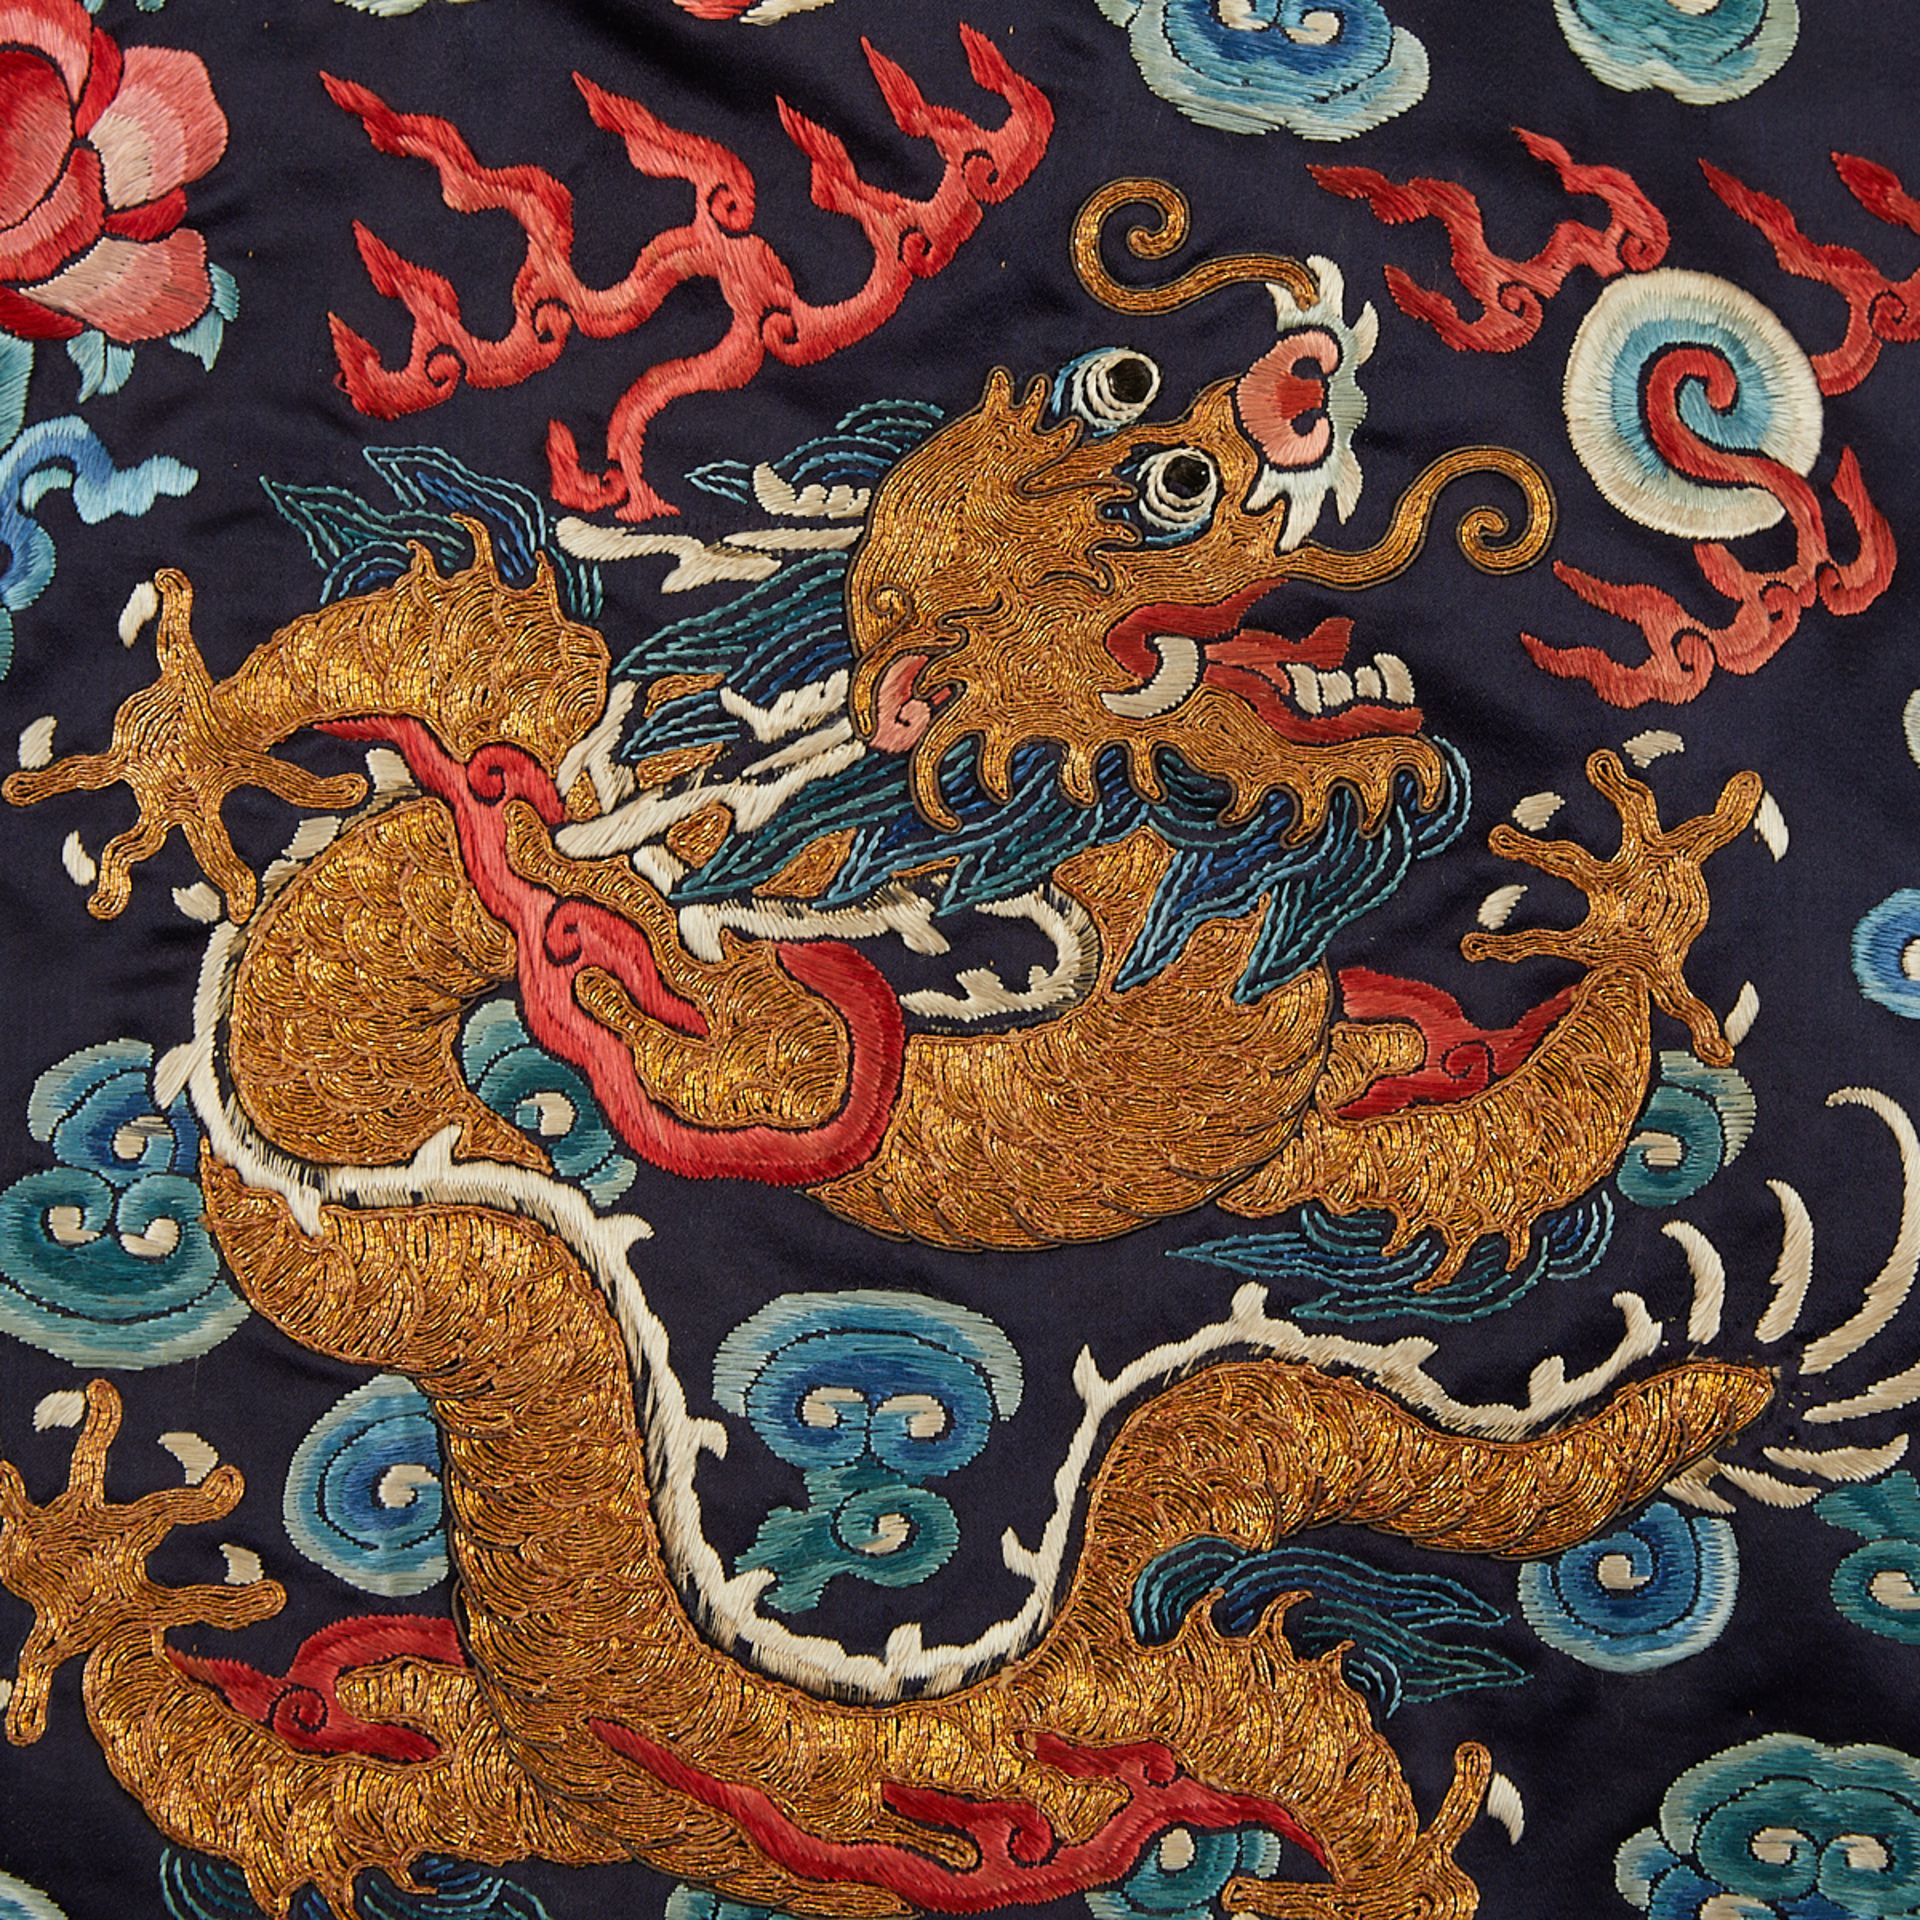 19th c. Chinese Embroidered Silk Dragon Robe - Image 6 of 9